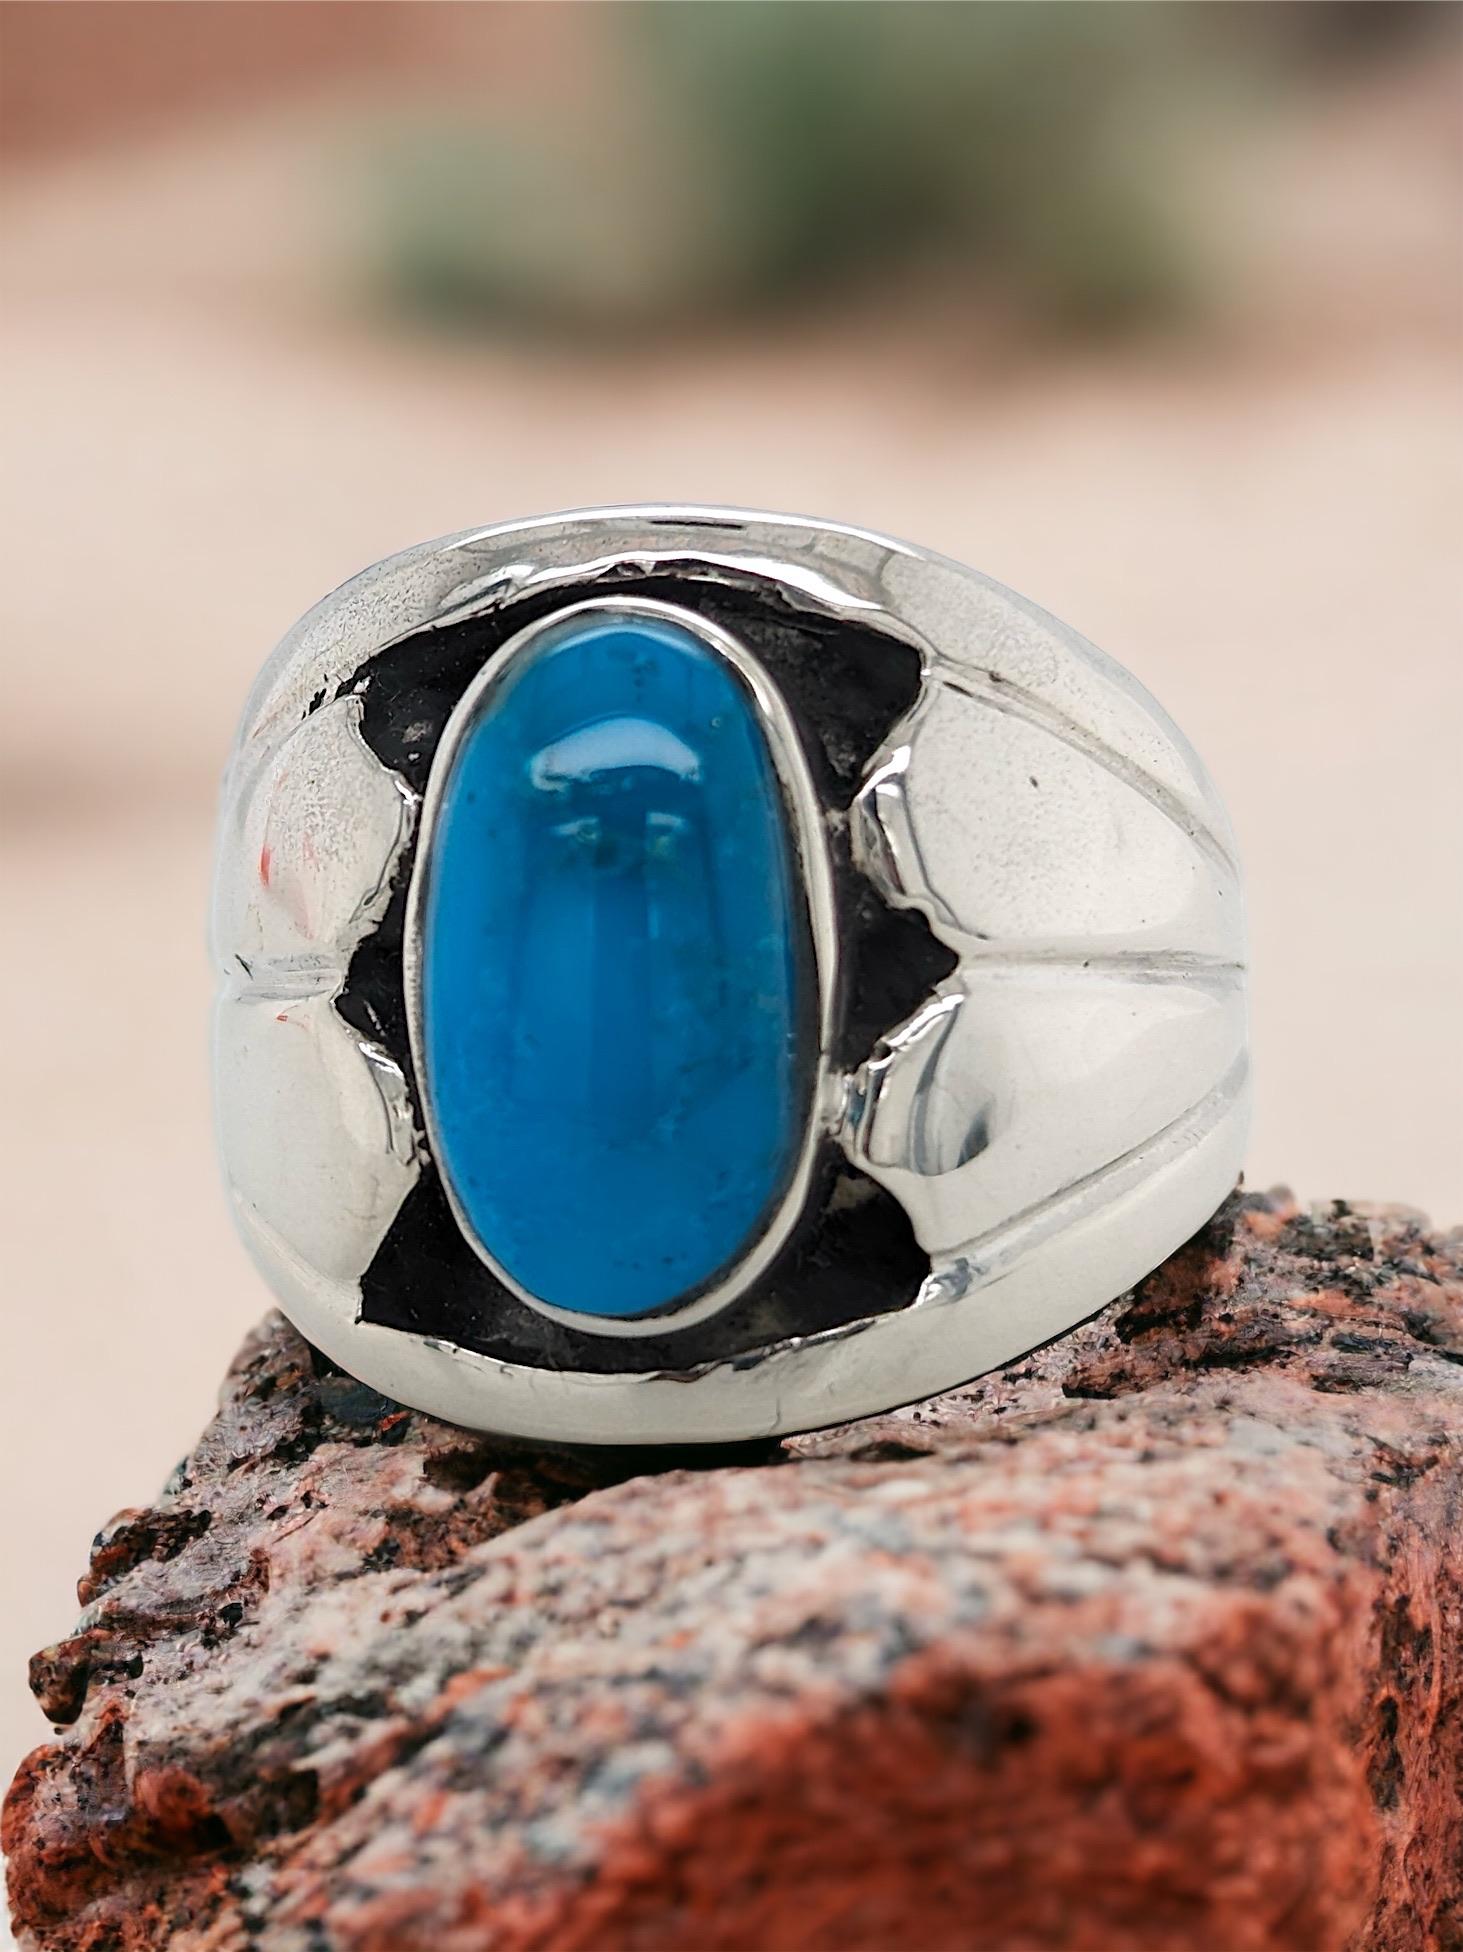 This stunning Sterling Silver Ring invites you to appreciate the beauty of handcrafted creativity.  In this one-of-a-kind piece, the real Kingman turquoise gemstone, renowned for its captivating colors, takes center stage.

Expert hands have